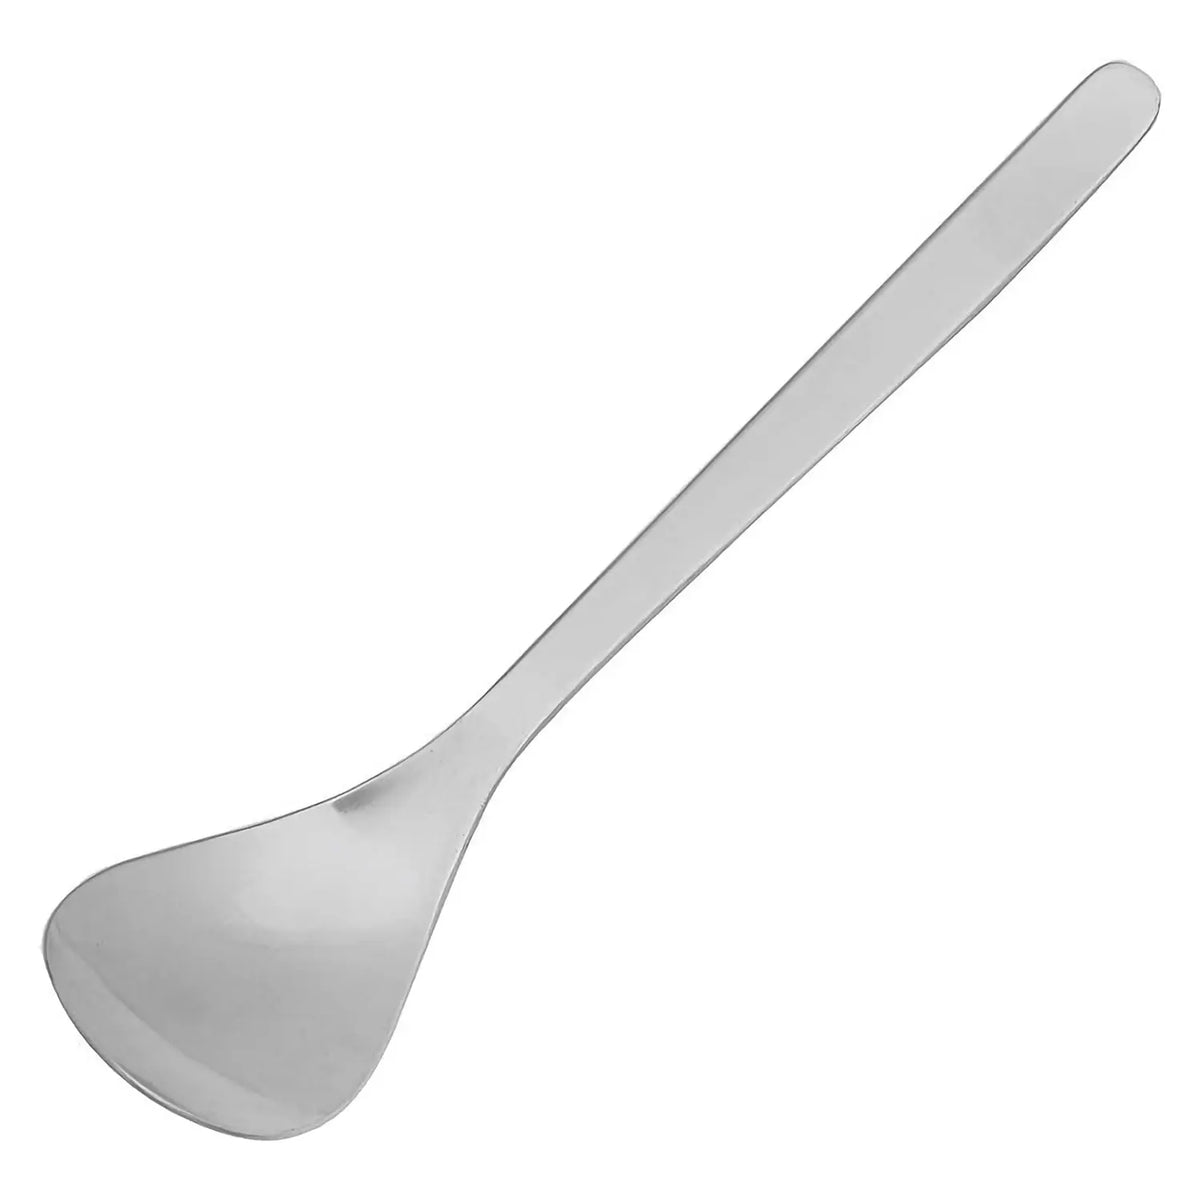 4 White Mixing Spoons. Plastic Cooking Spoons Baking Brewing Spoon Grill.  Mixing Spoon Dishwasher Safe.White Plastic Stirring Spoon.